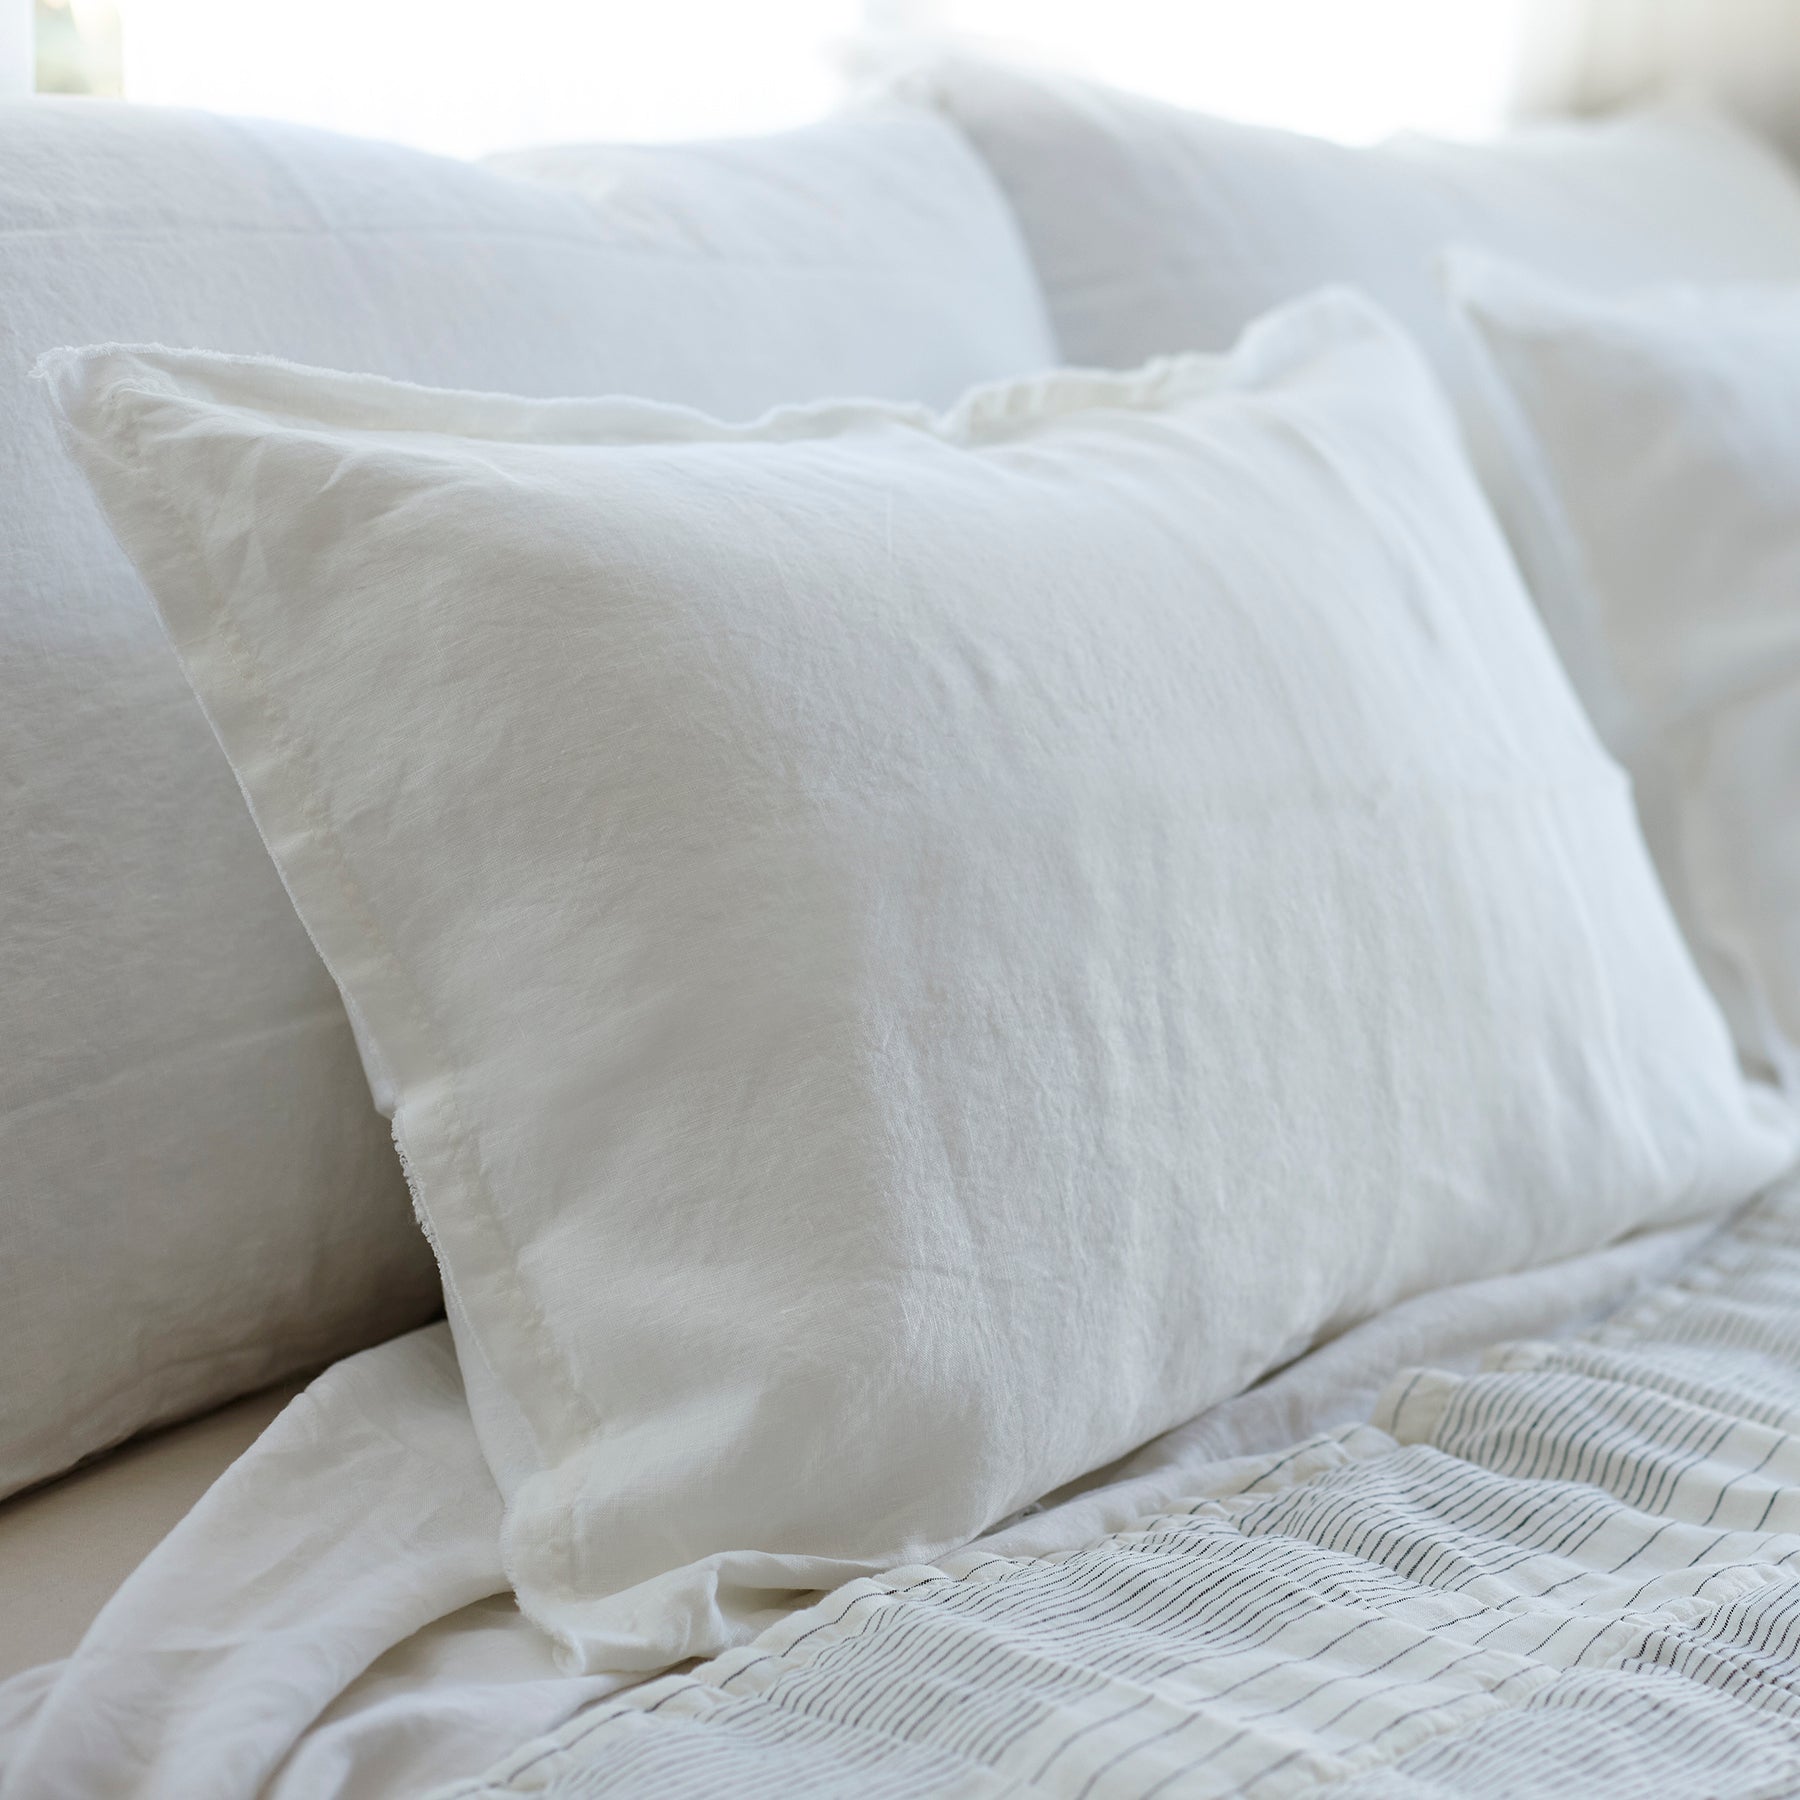 Pair of Linen Pillowcases in Antique White